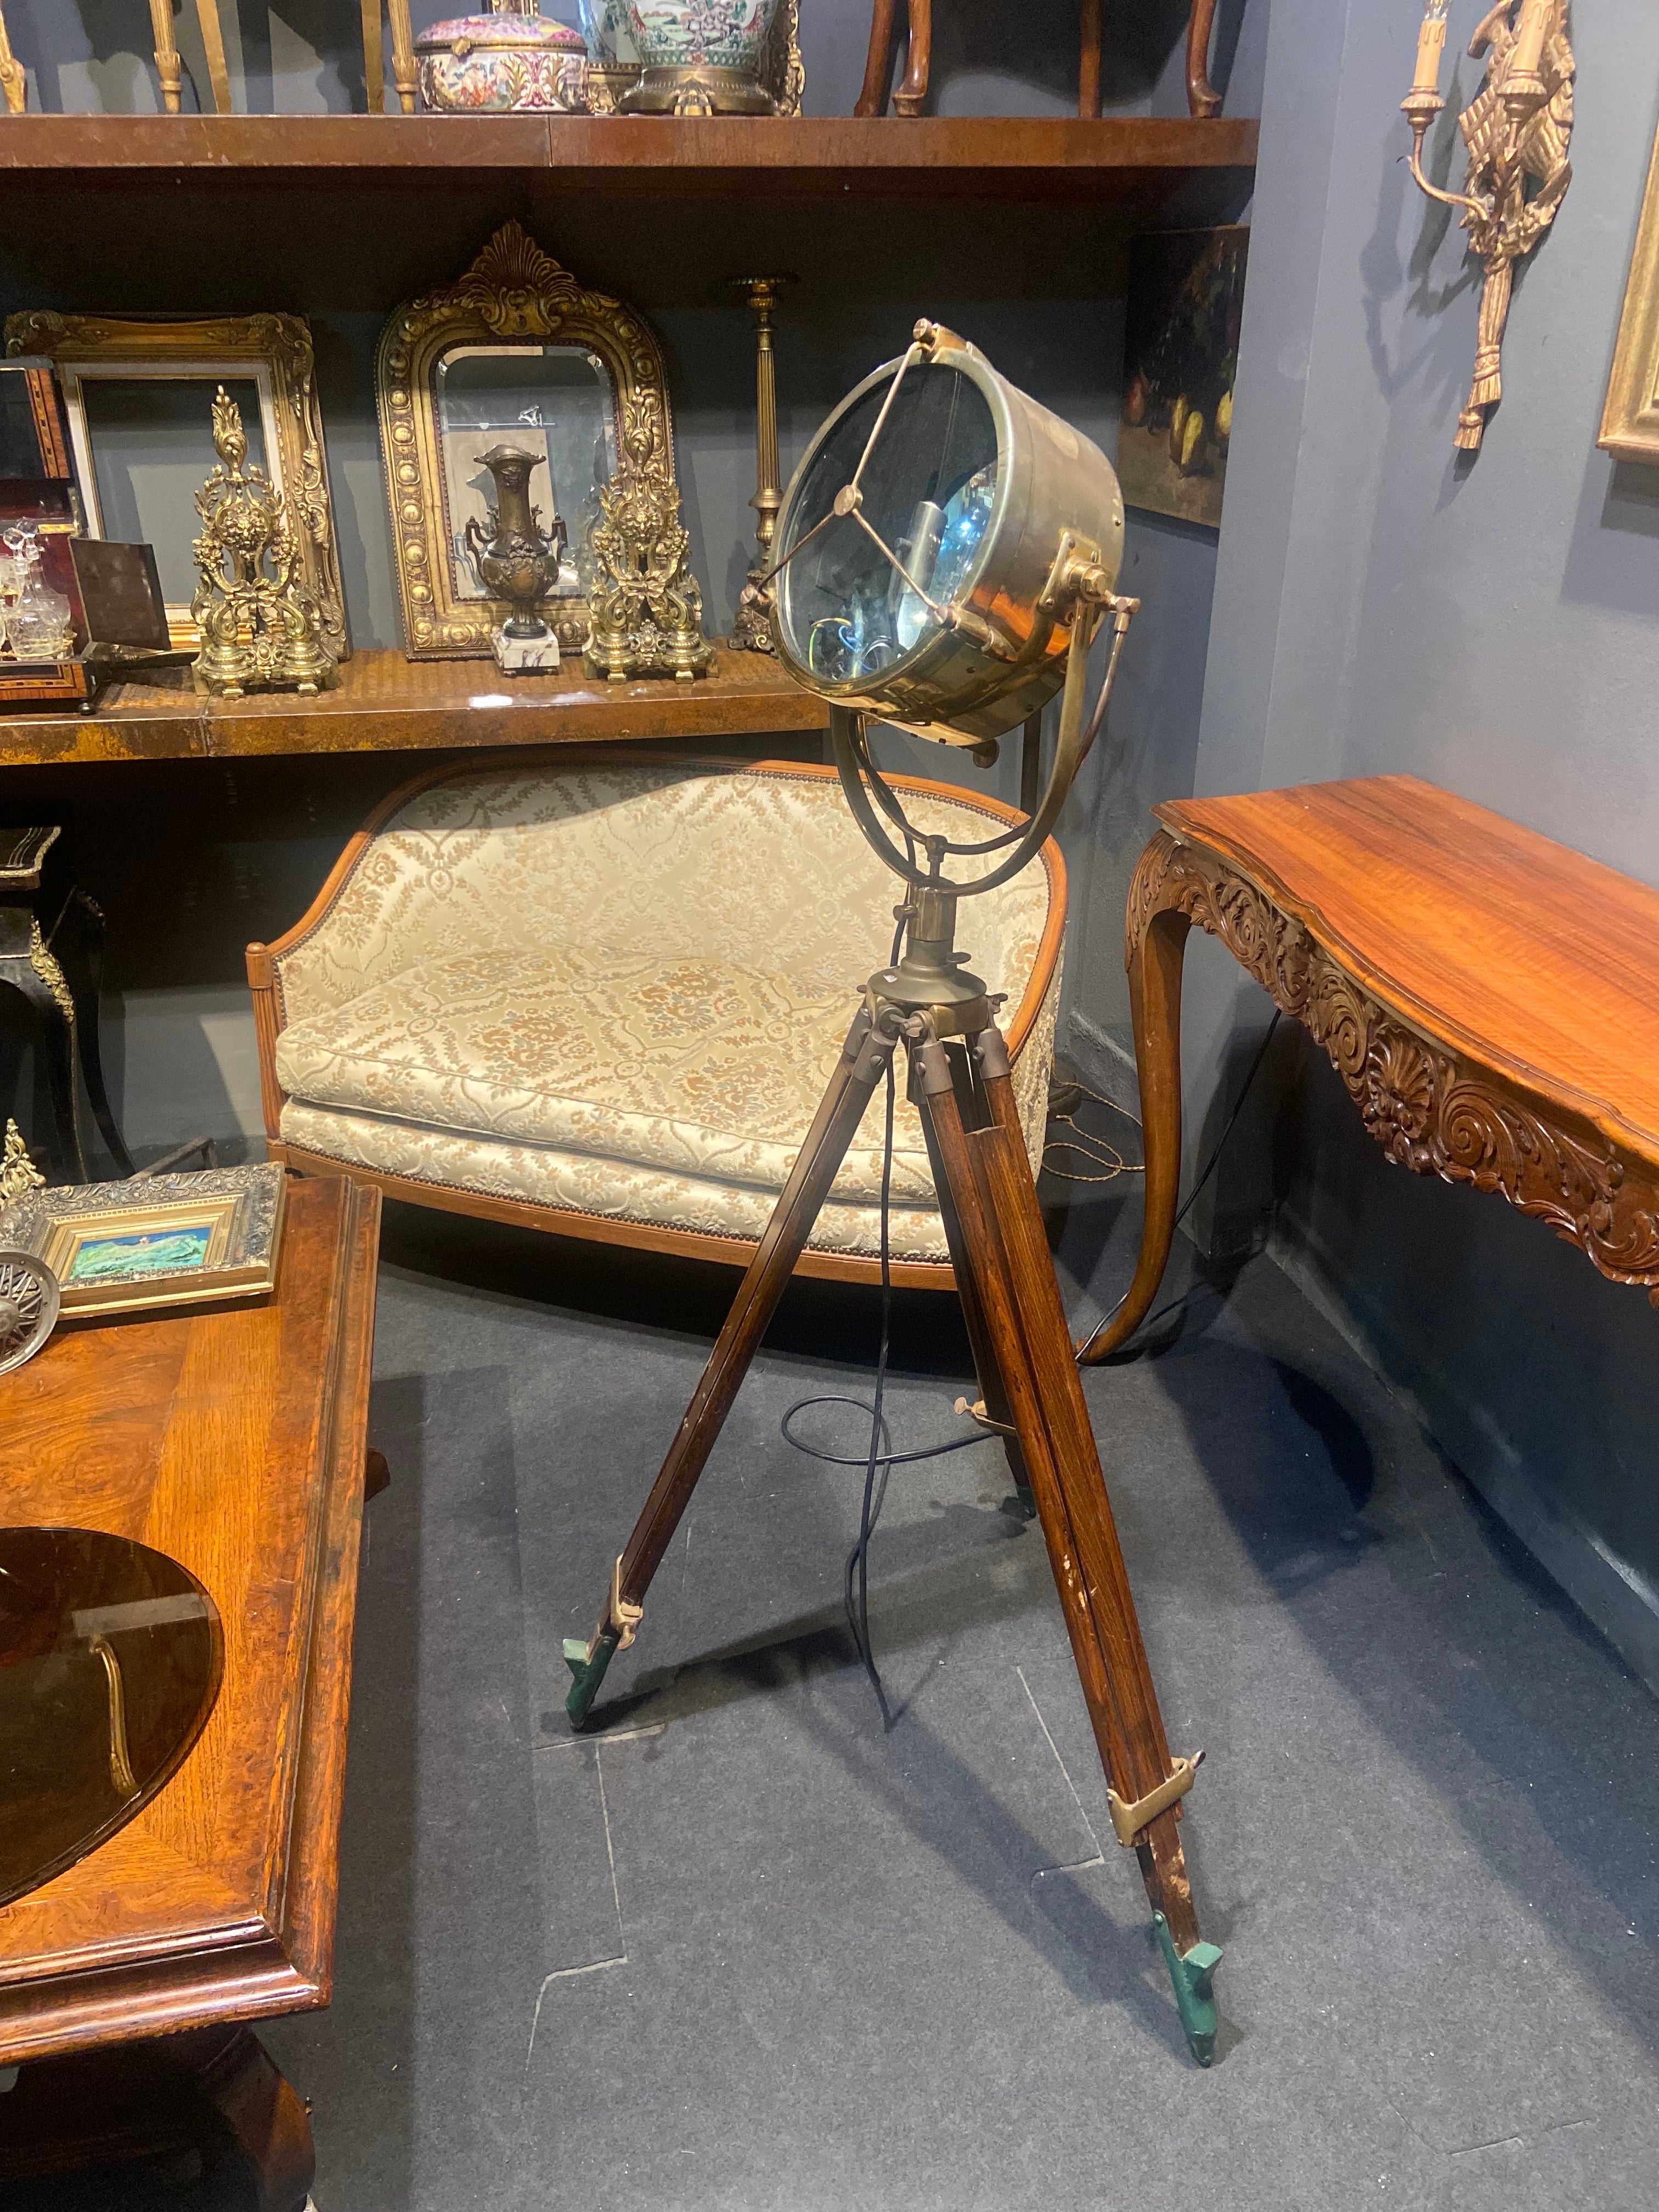 20th century English vintage brass search lamp paired with a wooden antique surveyors tripod, to create a stunning floor lamp. The overall condition is very good only the round mirror behind the bulb is broken.
The wooden tripod legs could be